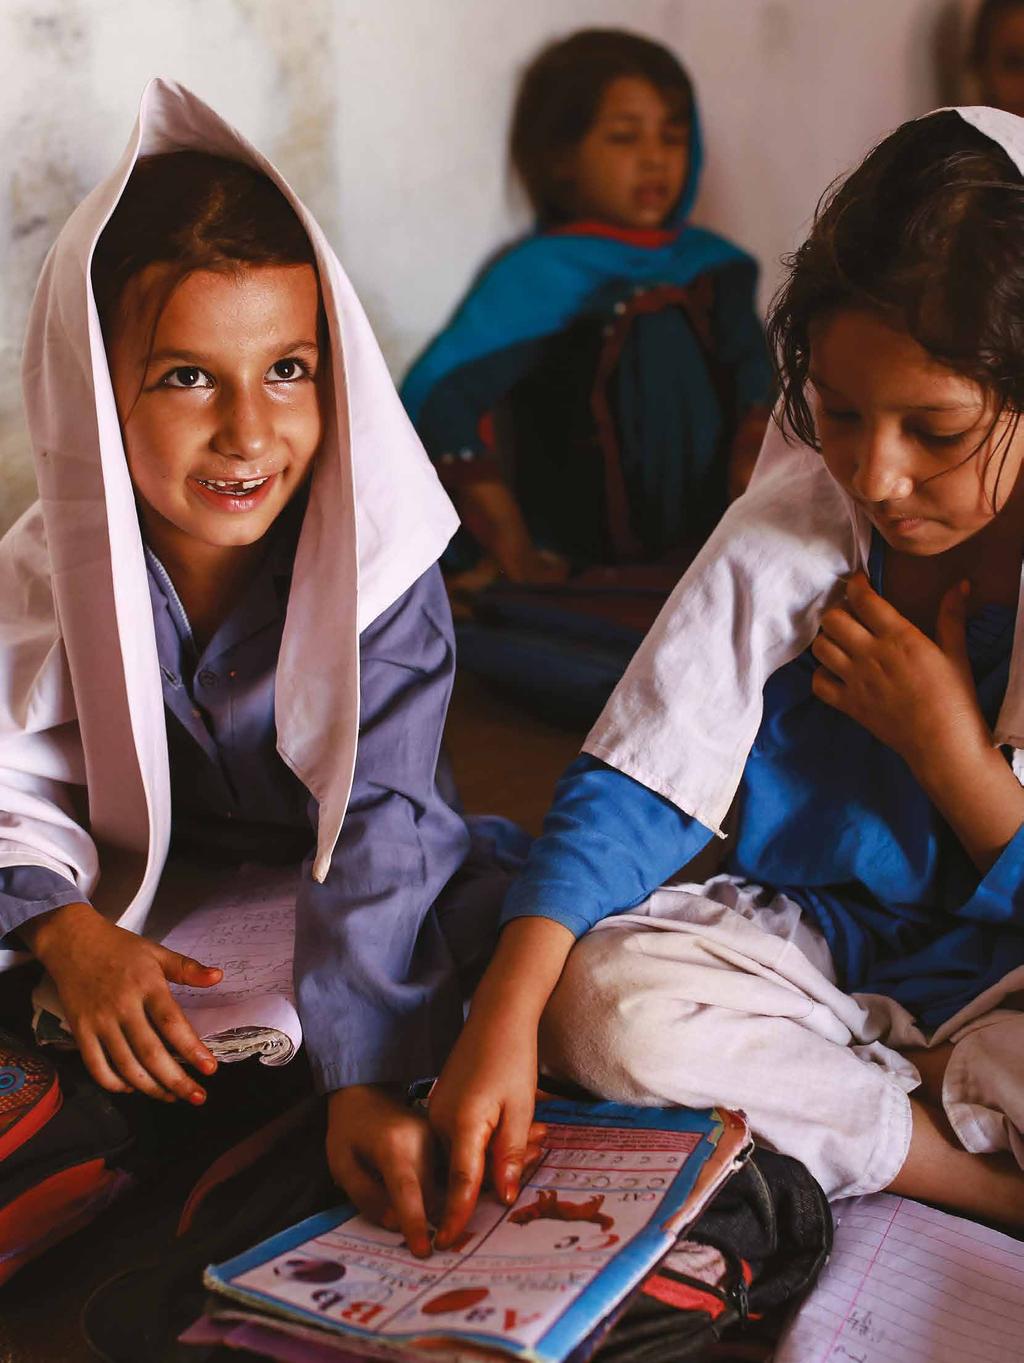 refugees Pakistan. A school for girls in an Afghan refugee village.